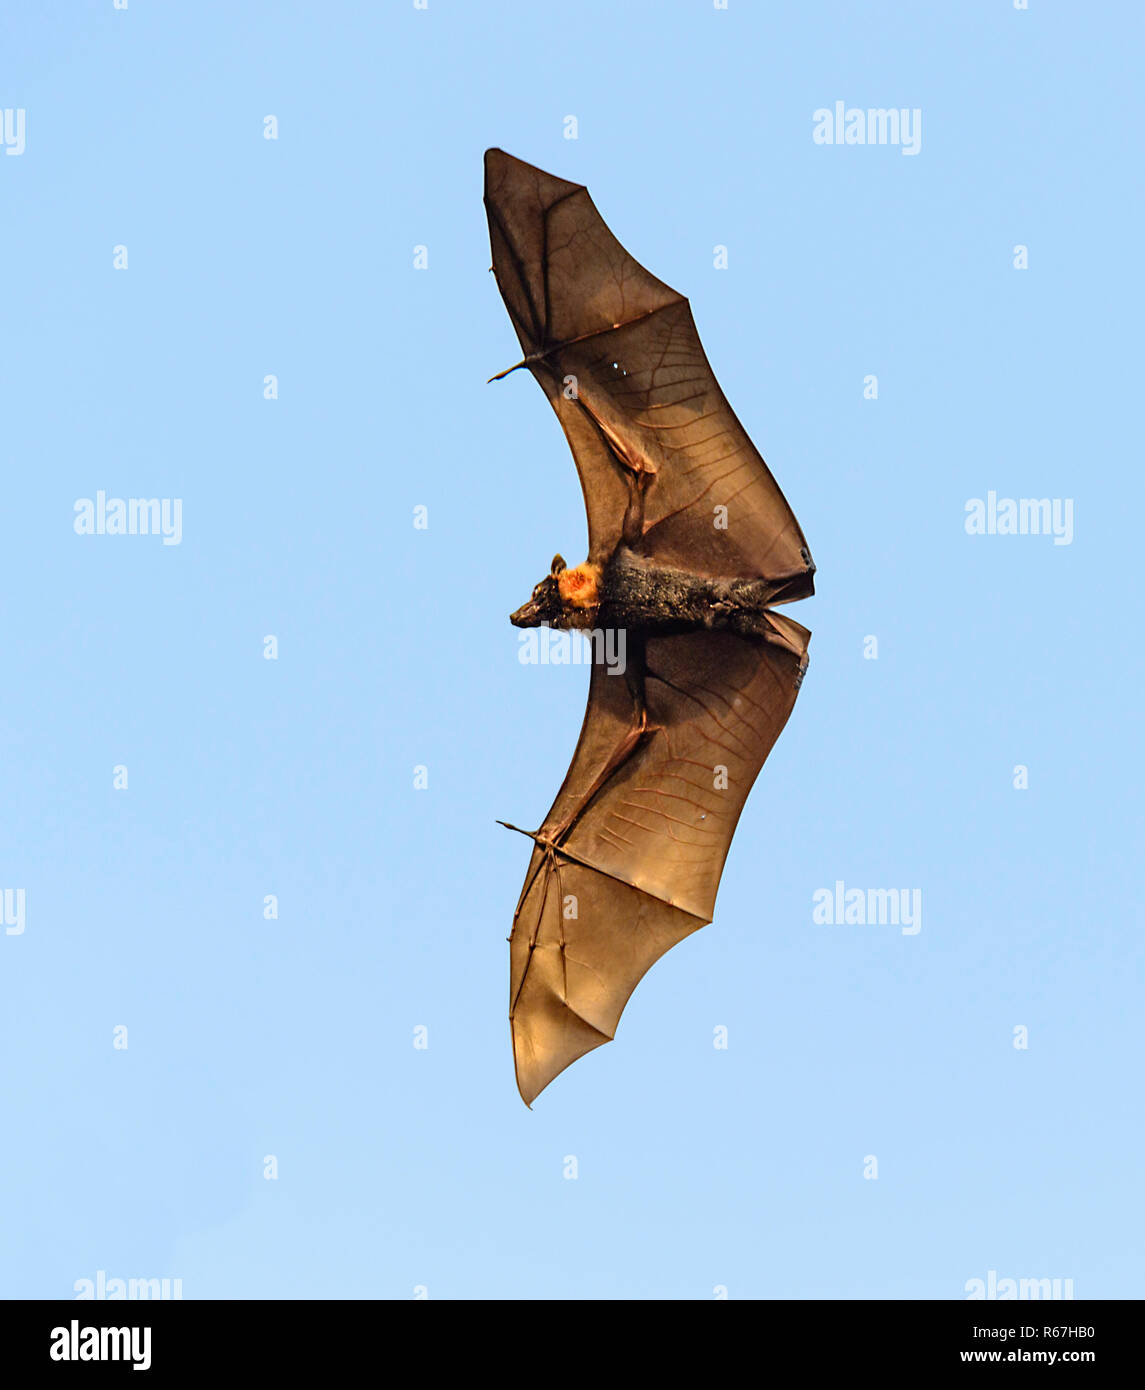 Spectacled flying fox or Spectacled Fruit Bat (Pteropus conspicillatus), is a megabat that lives in Queensland, Australia Stock Photo